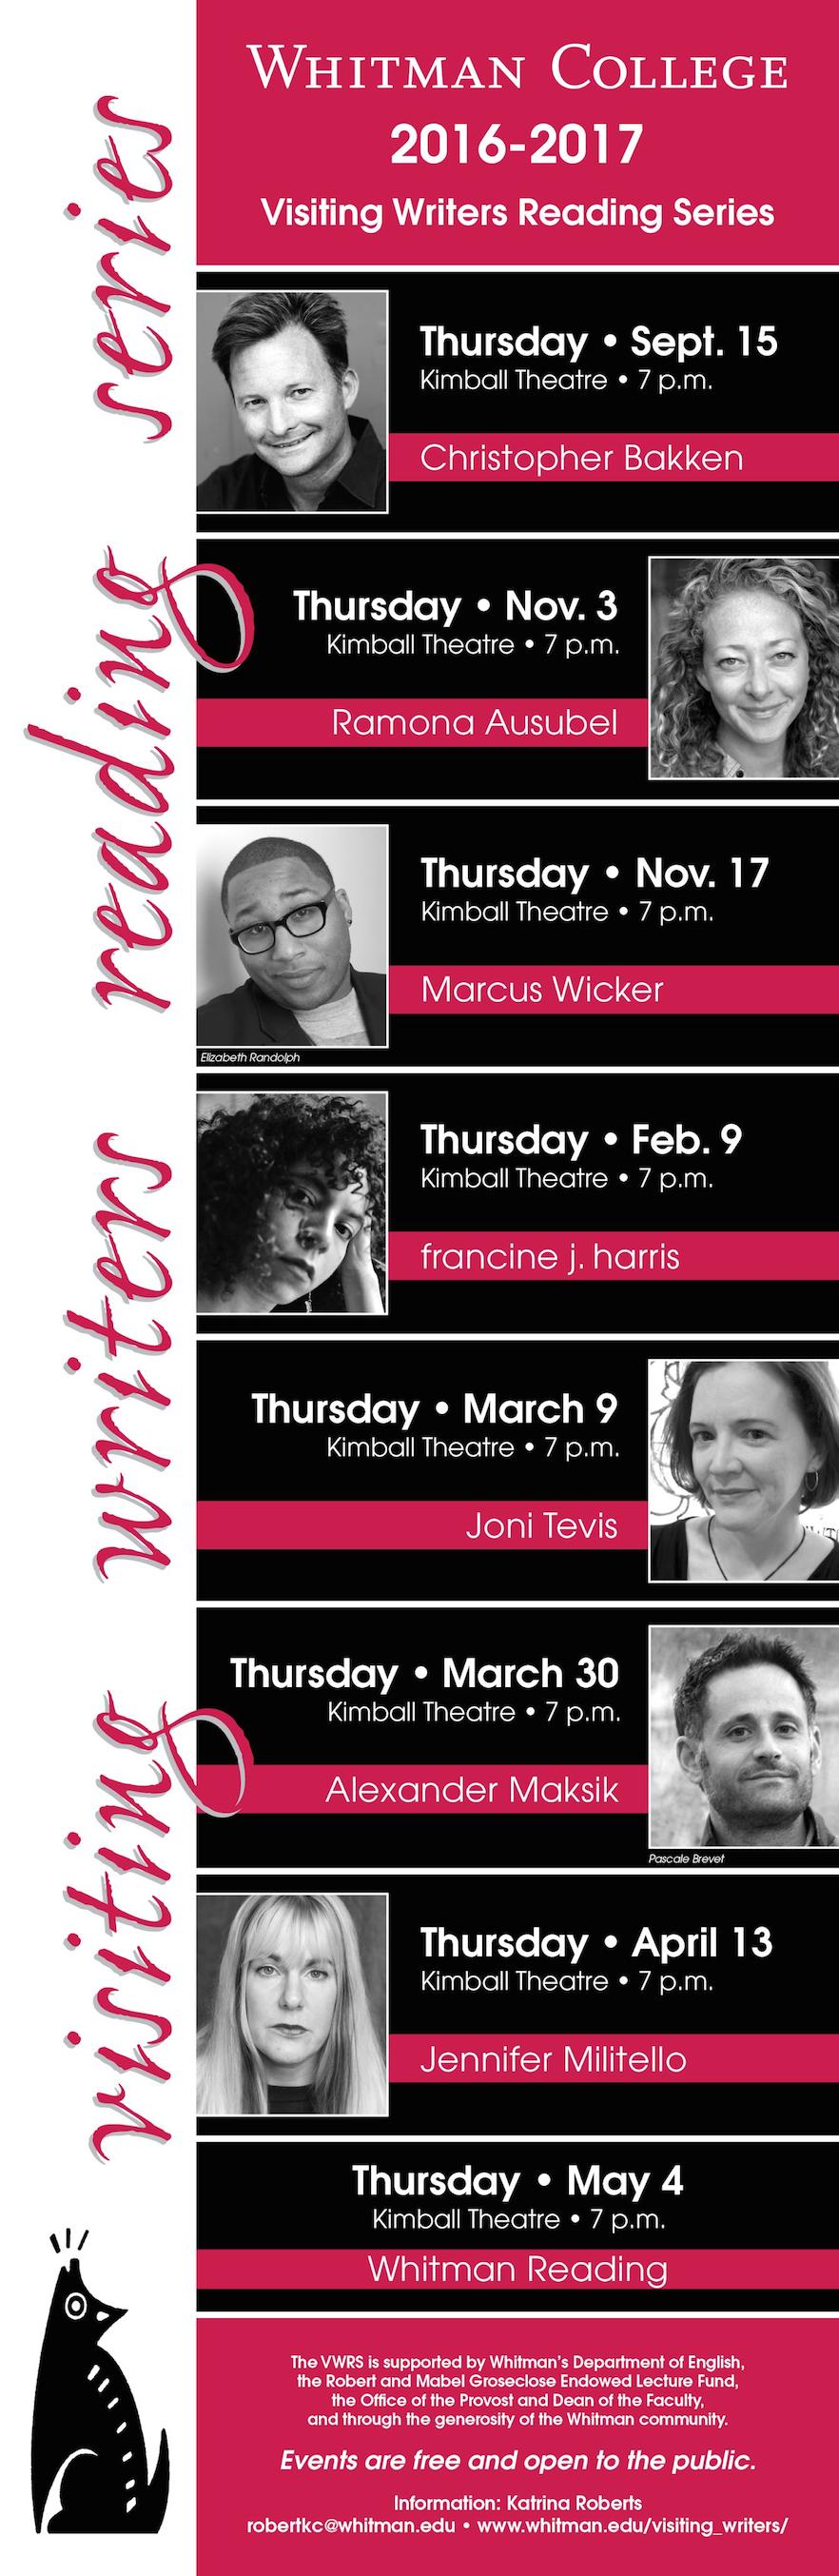 Visiting Writers Reading Series poster 2016-17